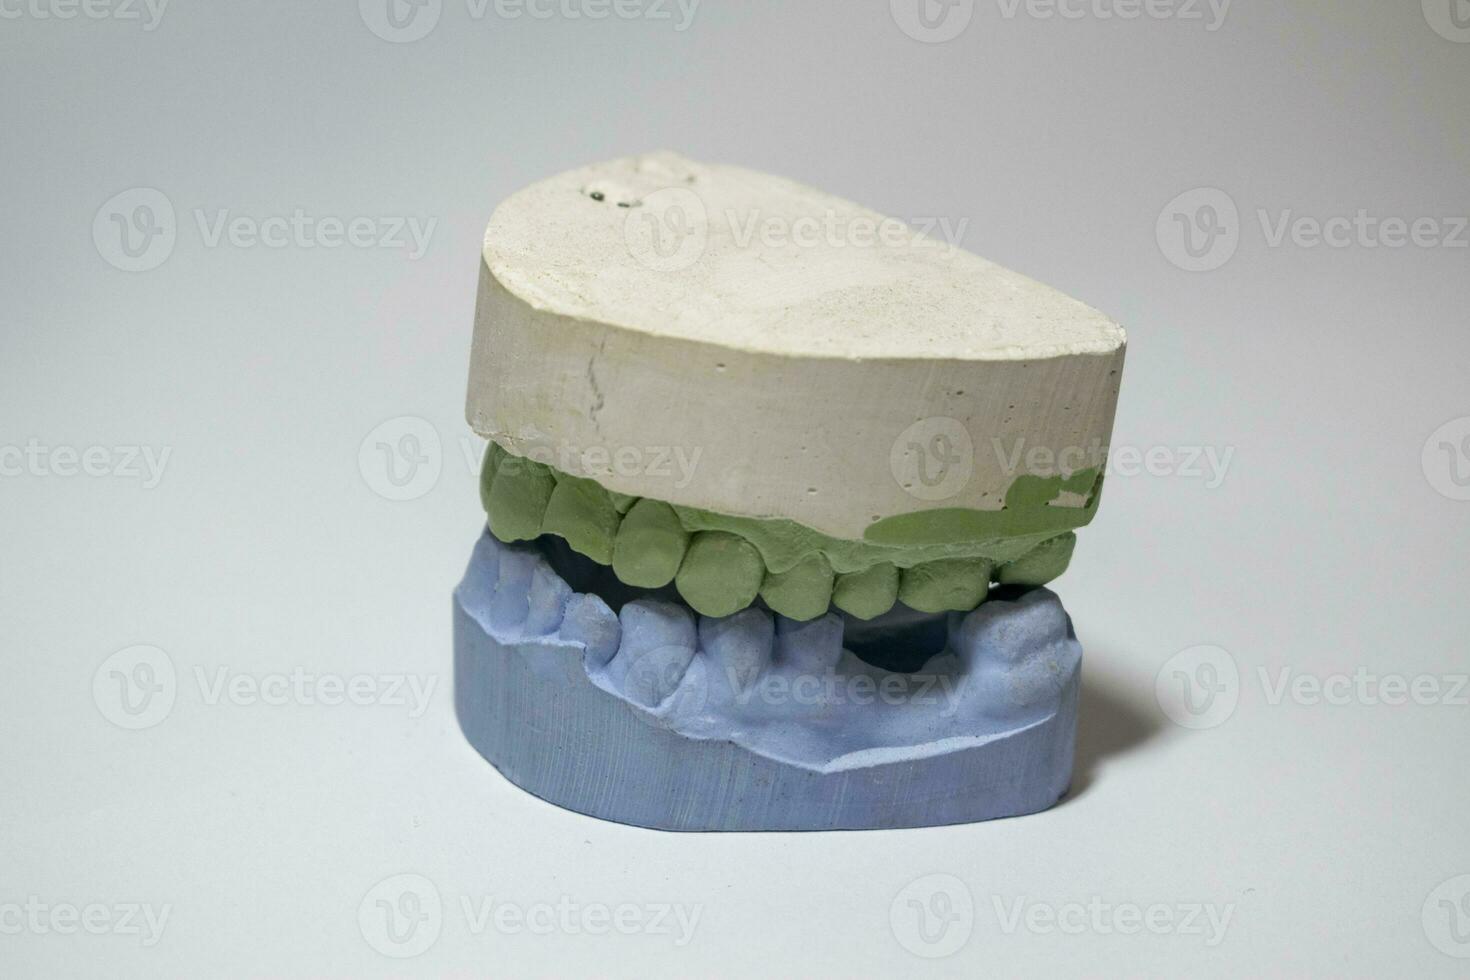 Plaster impressions of the teeth of the lower and upper jaws for prosthetics and photo